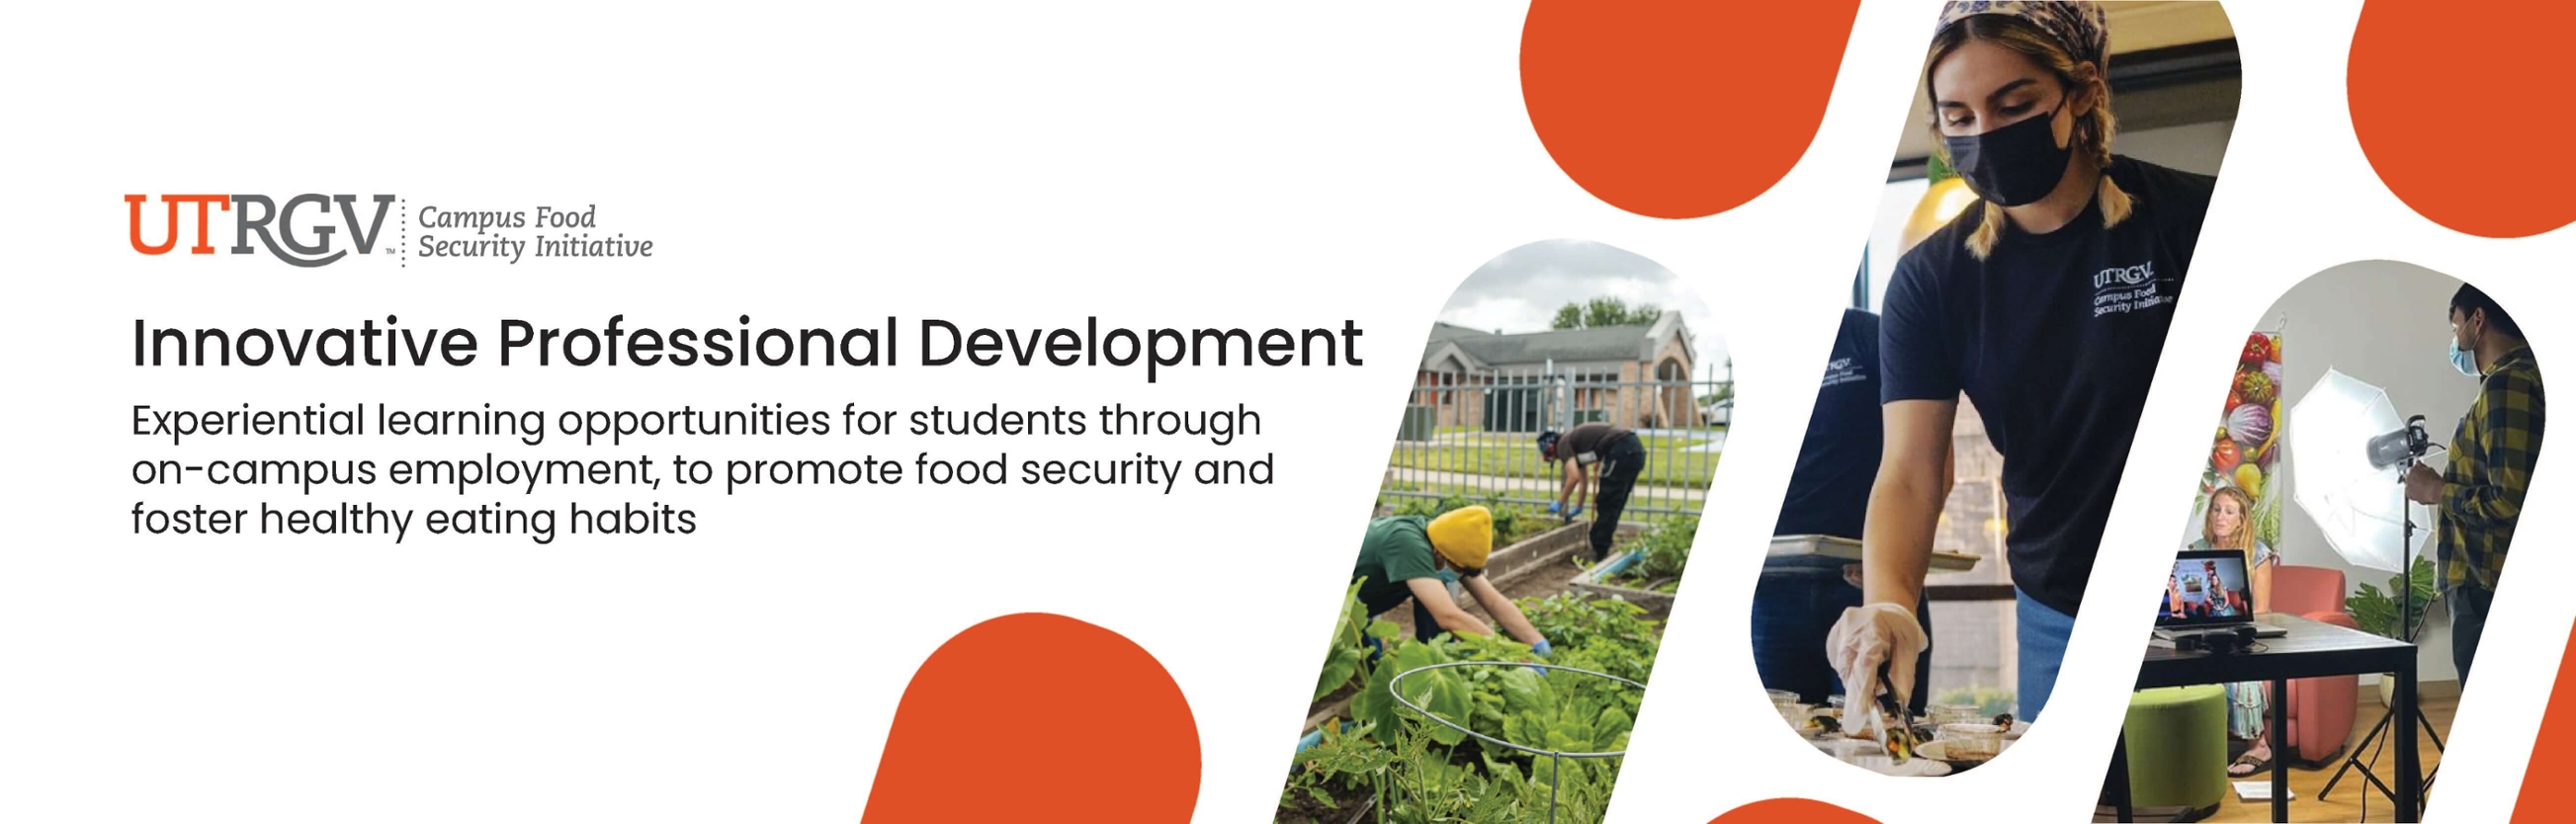 The University of Texas Rio Grande Valley's Campus Food Security Initiative offers students innovative professional development.